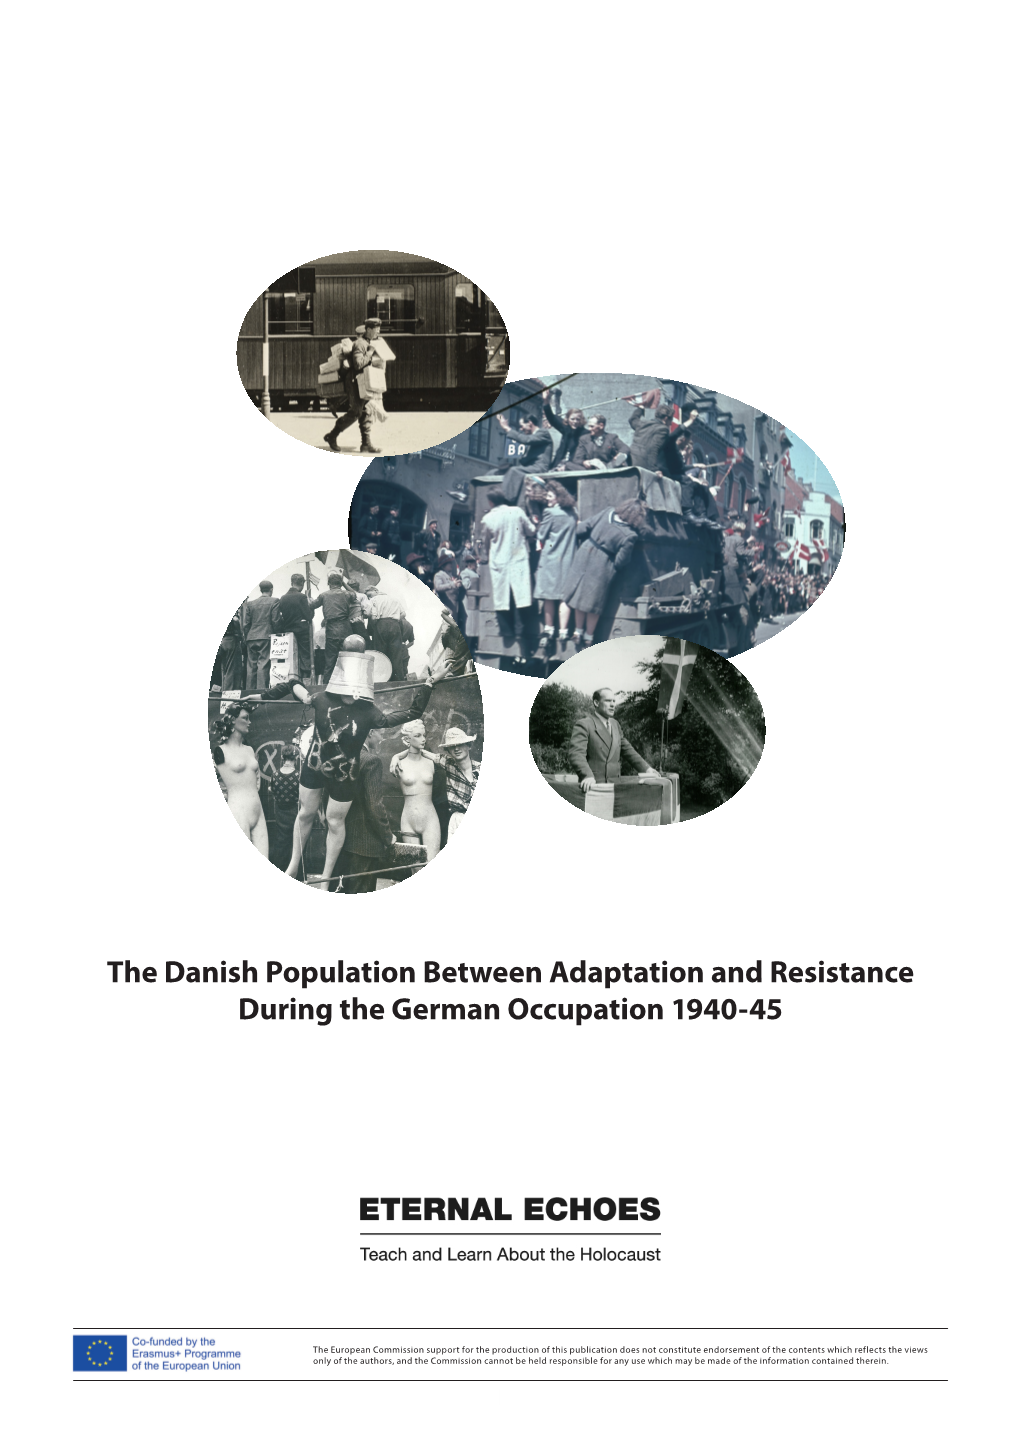 The Danish Population Between Adaptation and Resistance During the German Occupation 1940-45